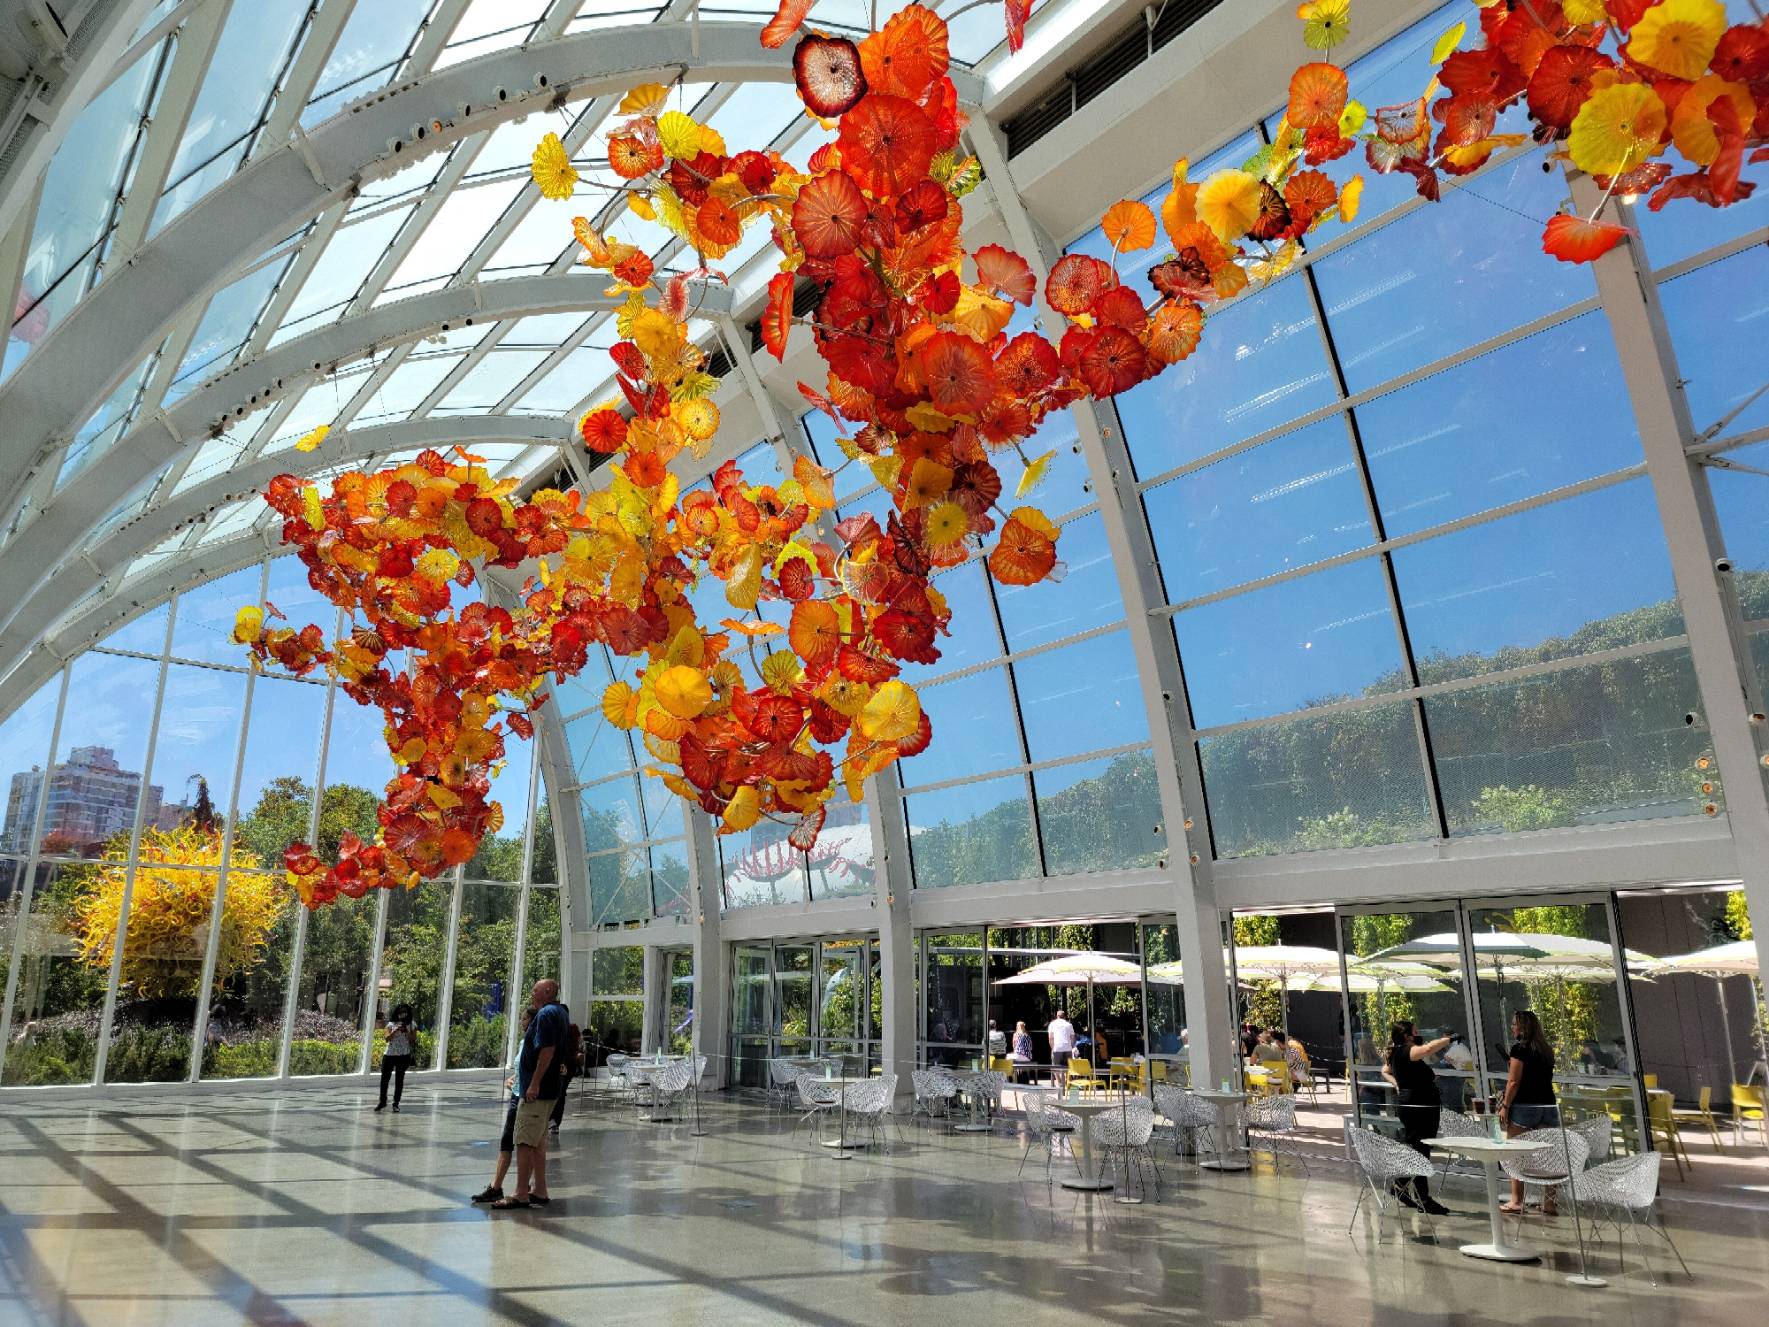 The entranceway starts off with the hanging flower sculpures.